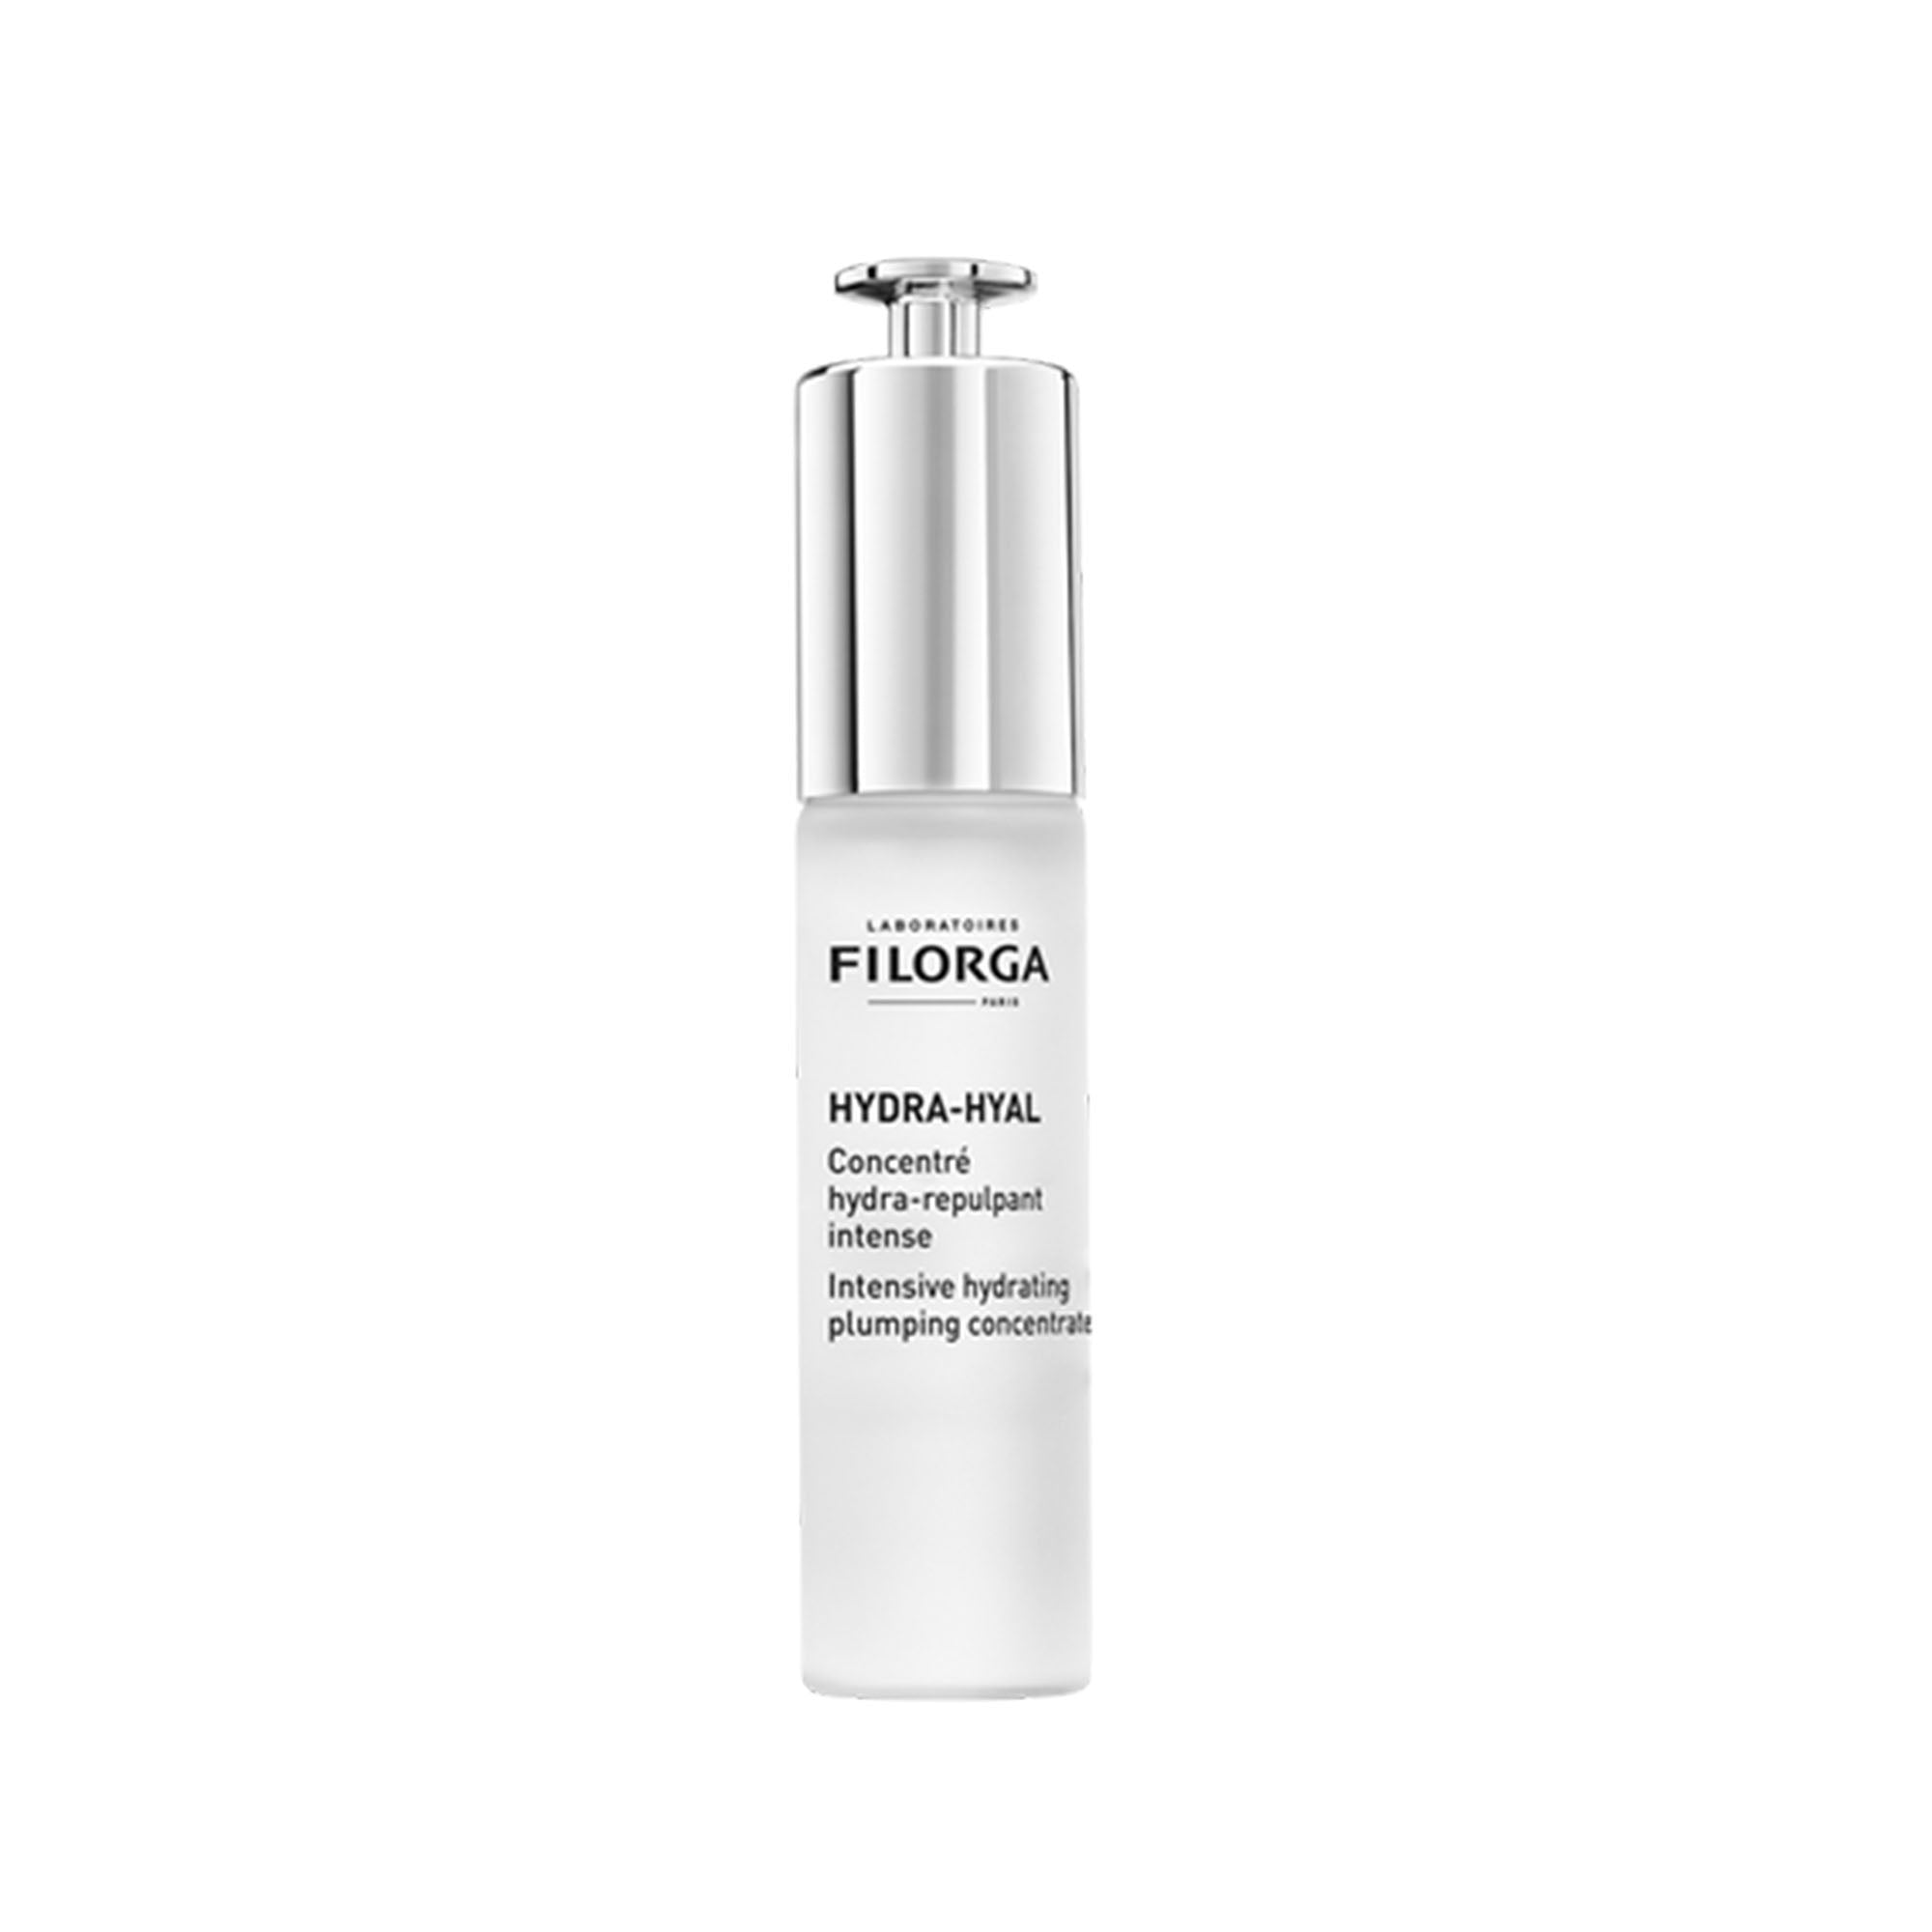 Filorga 尿酸保濕精華 | Hydra-Hyal Intensive Hydrating Plumping Concentrate 30ml